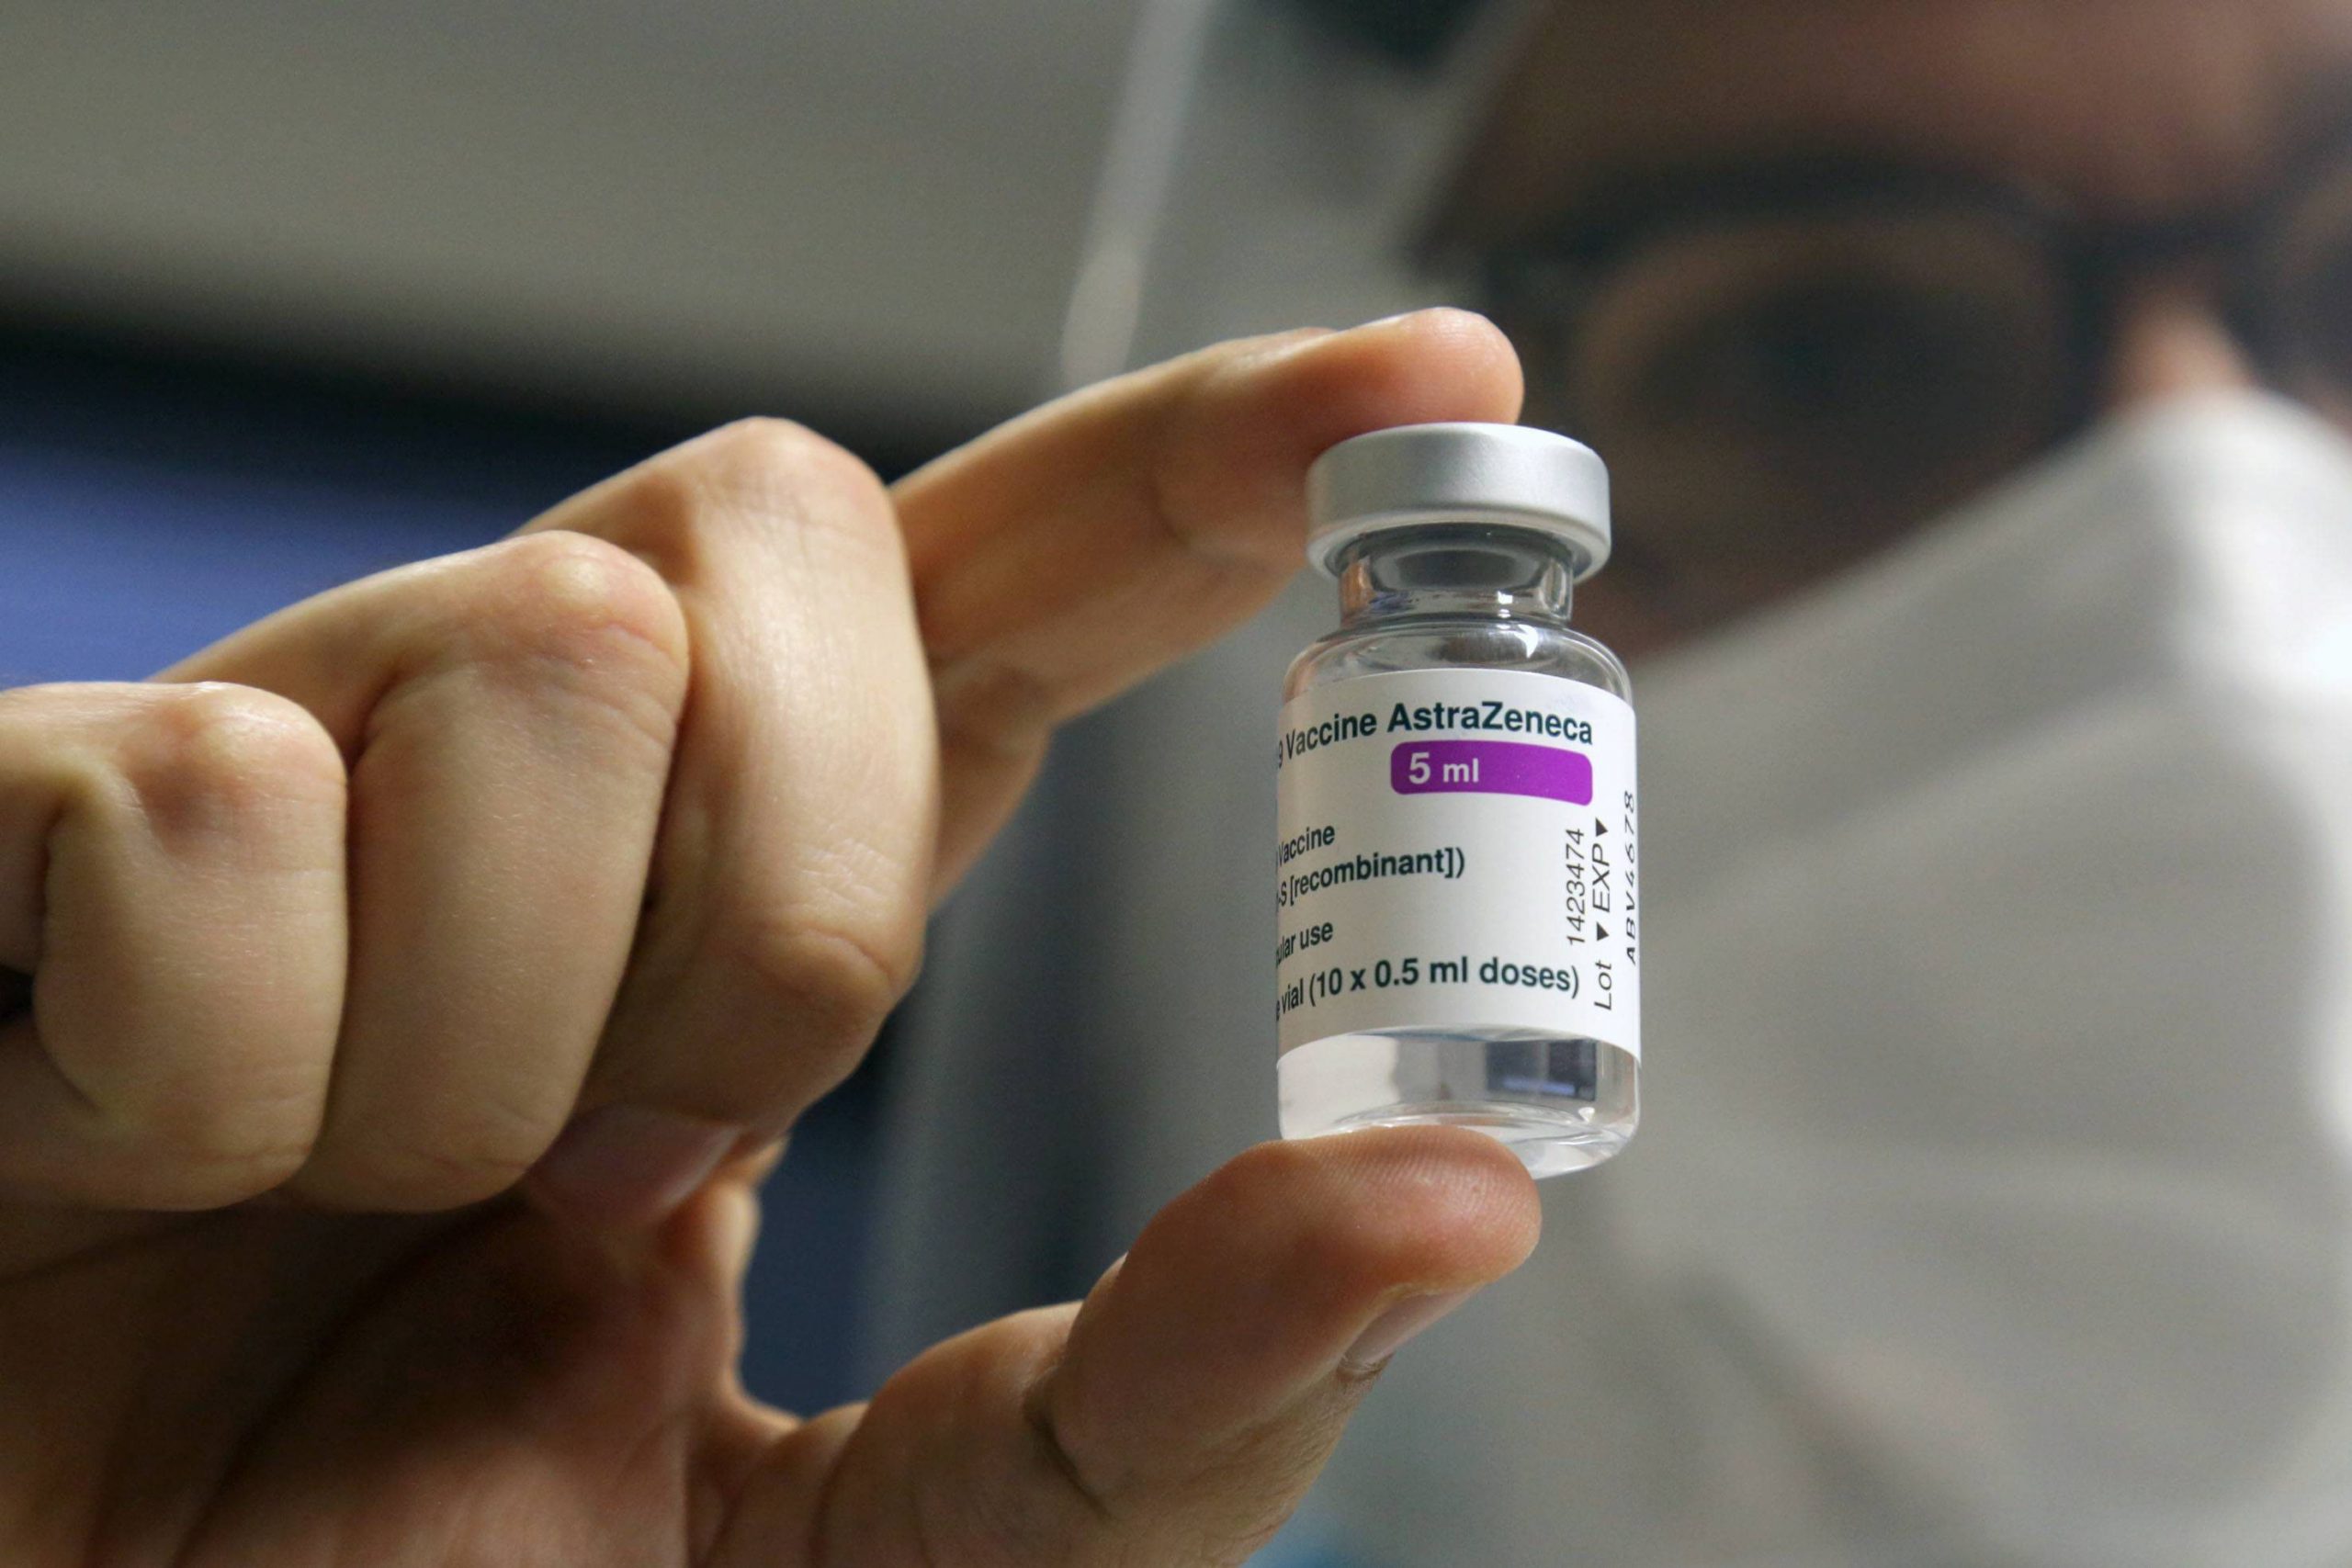 Costa Blanca residents in Spain waiting for their second AstraZeneca injection will start getting jab dates from Friday